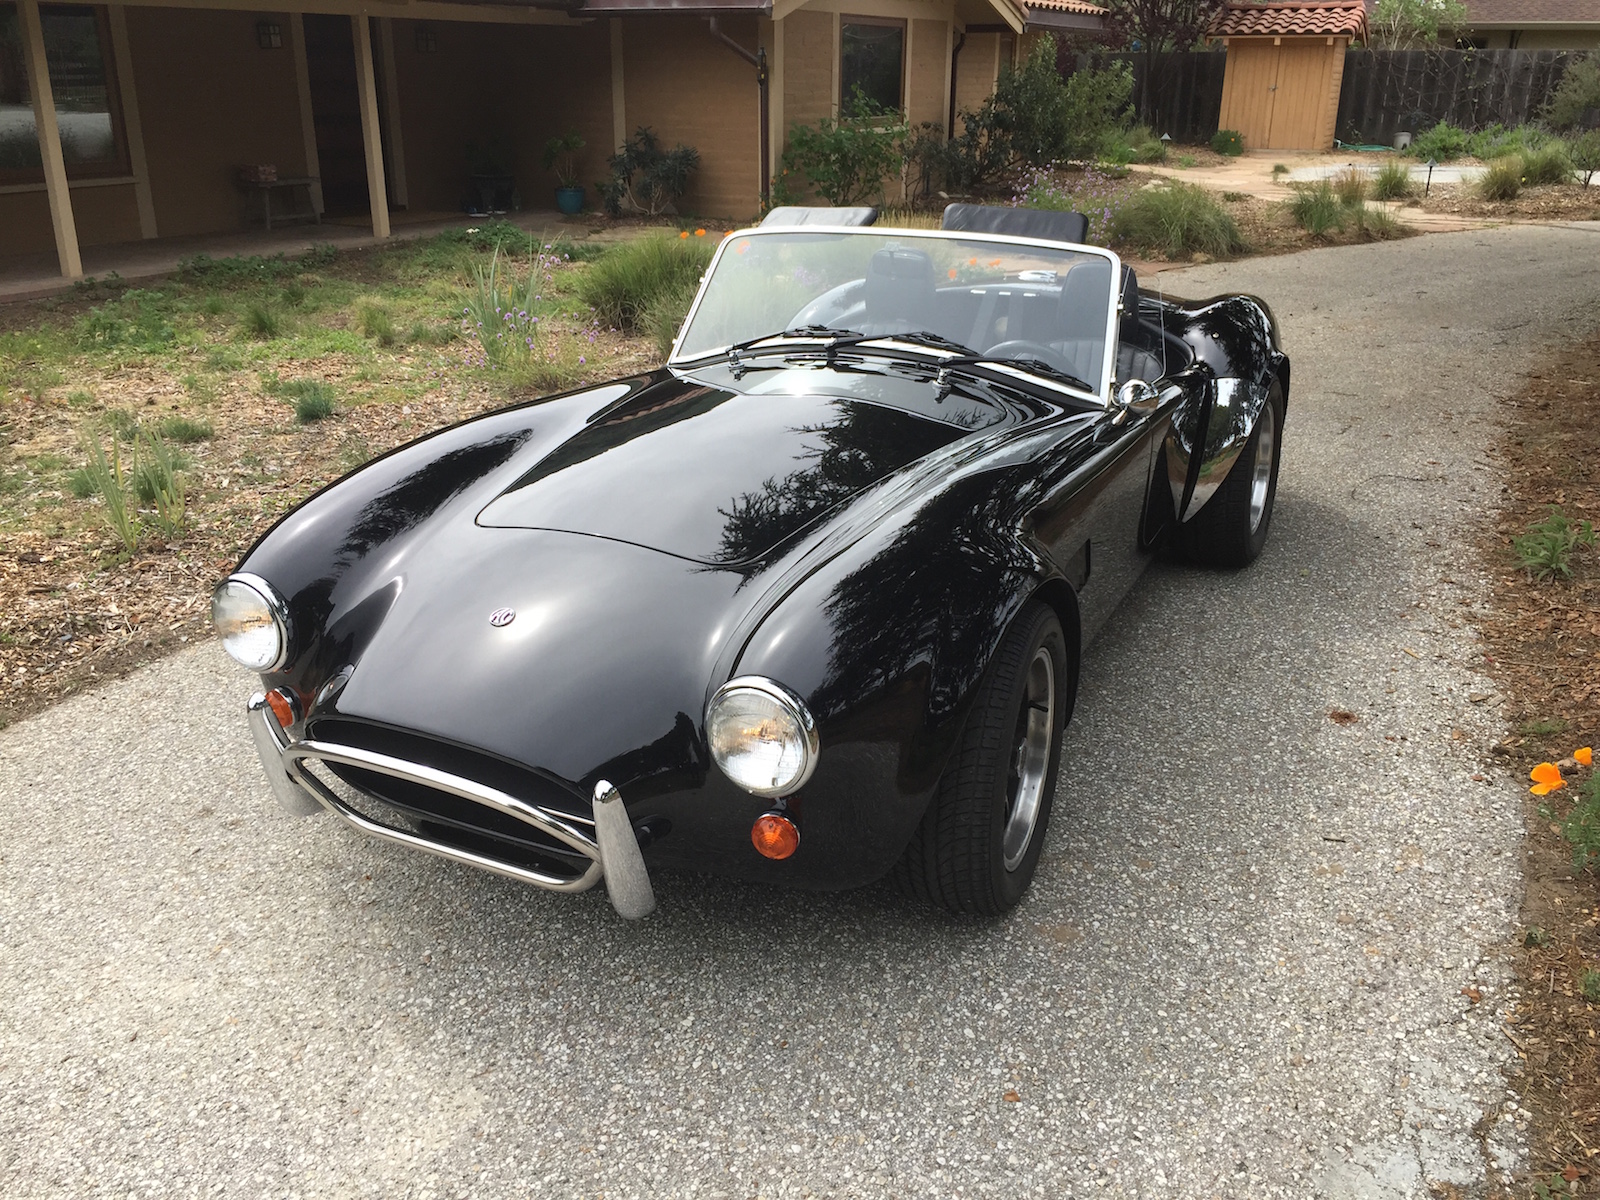 This AC Cobra Arrived Today